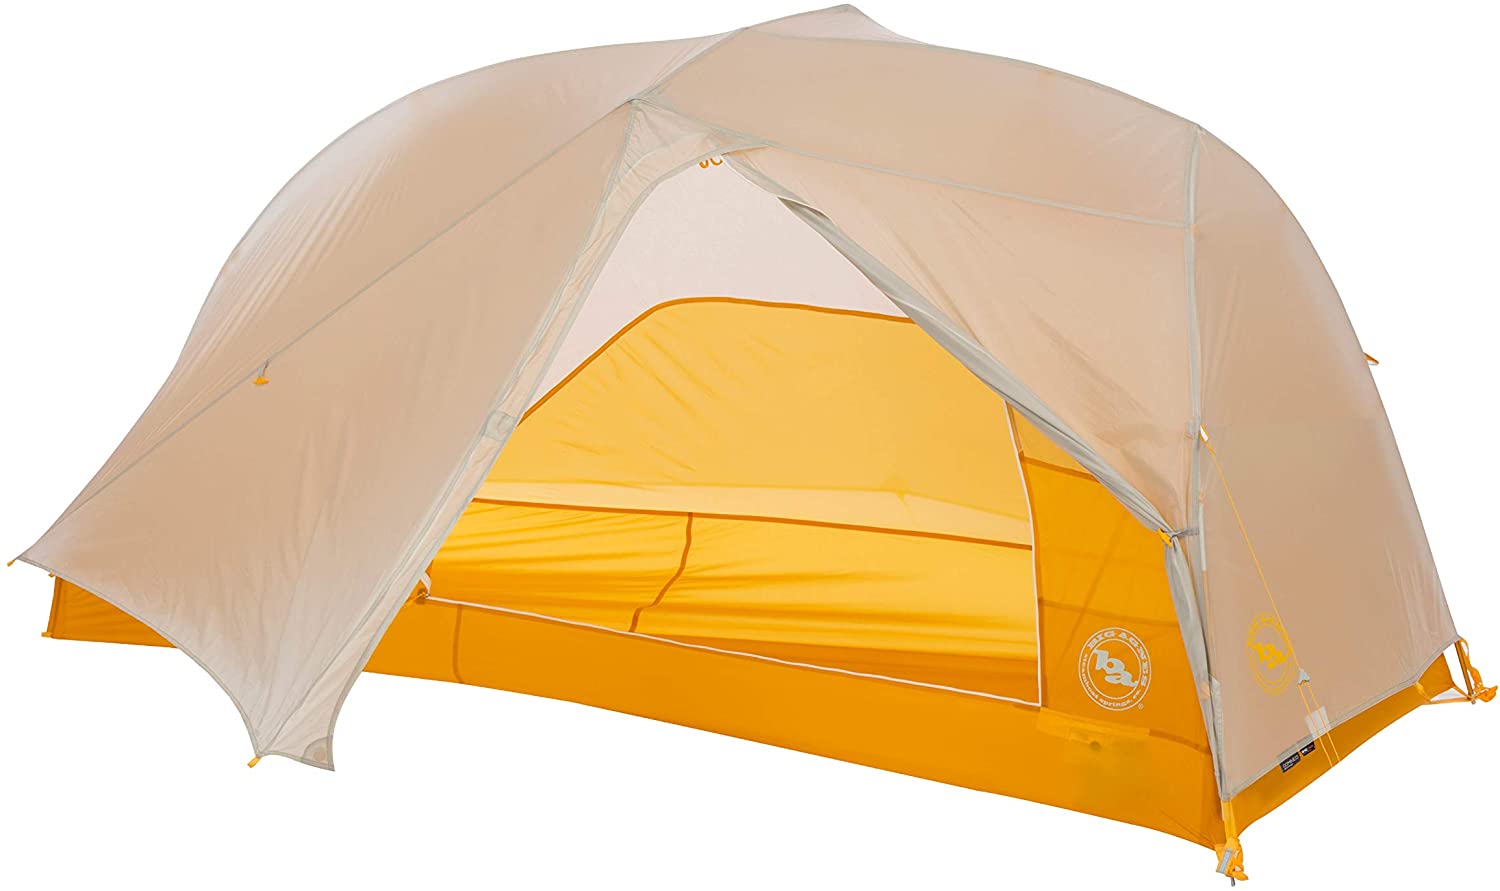 Best Ultralight Backpacking Tents